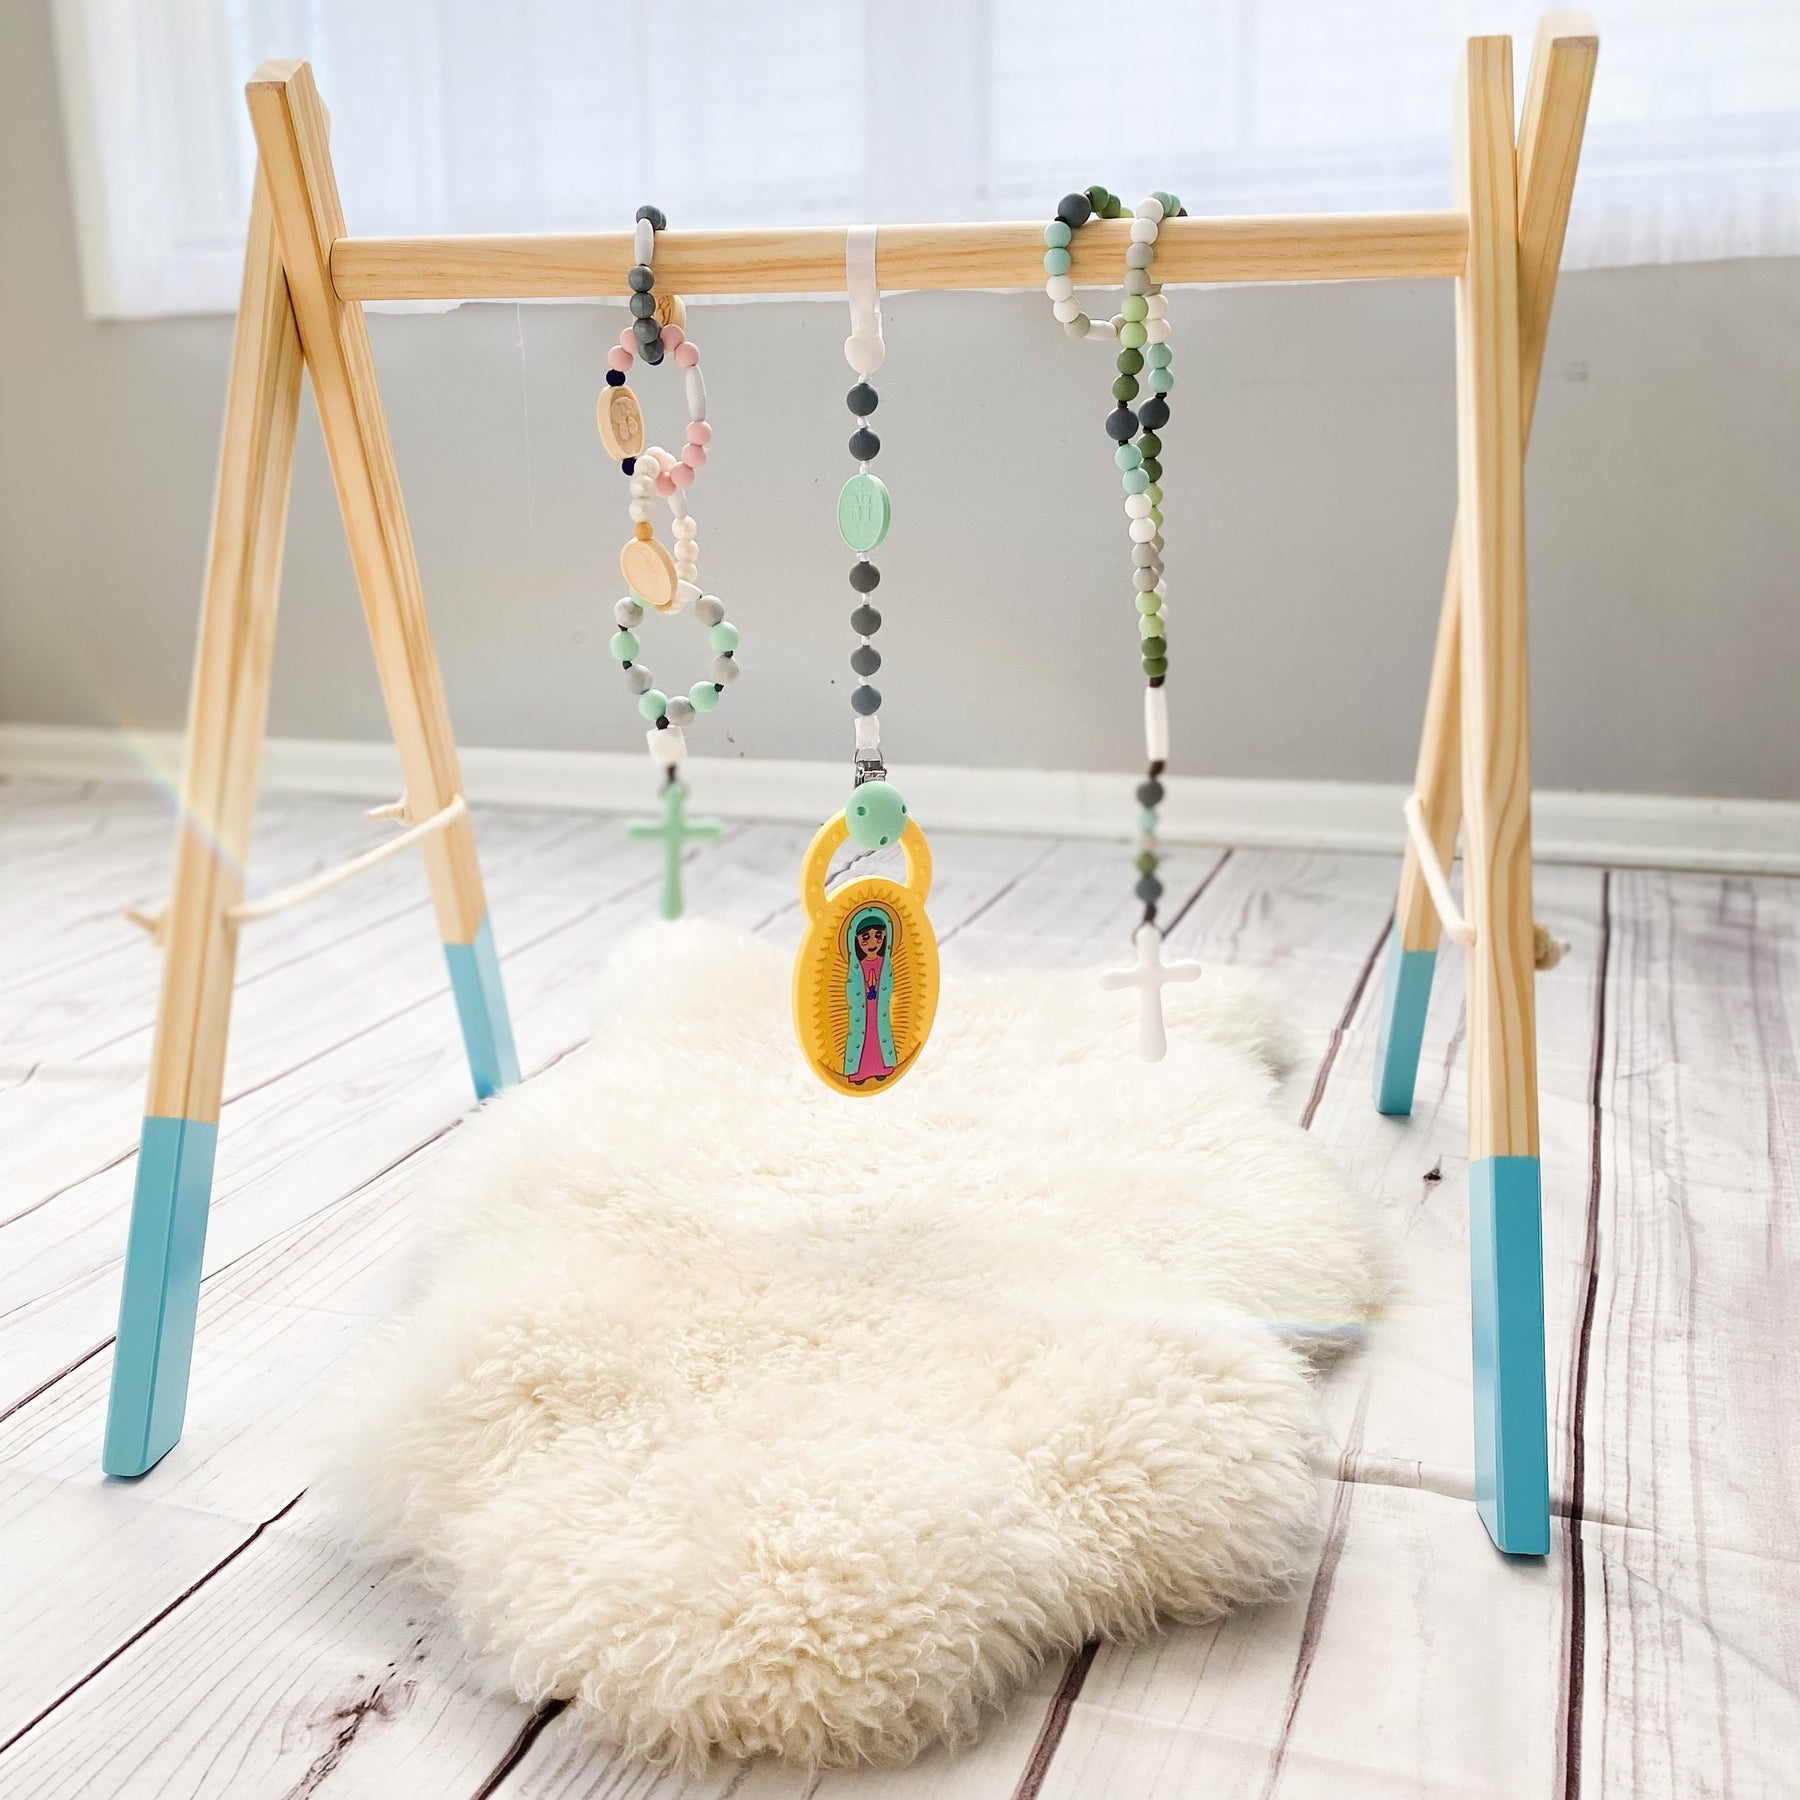 NEW | Wooden Baby Gym